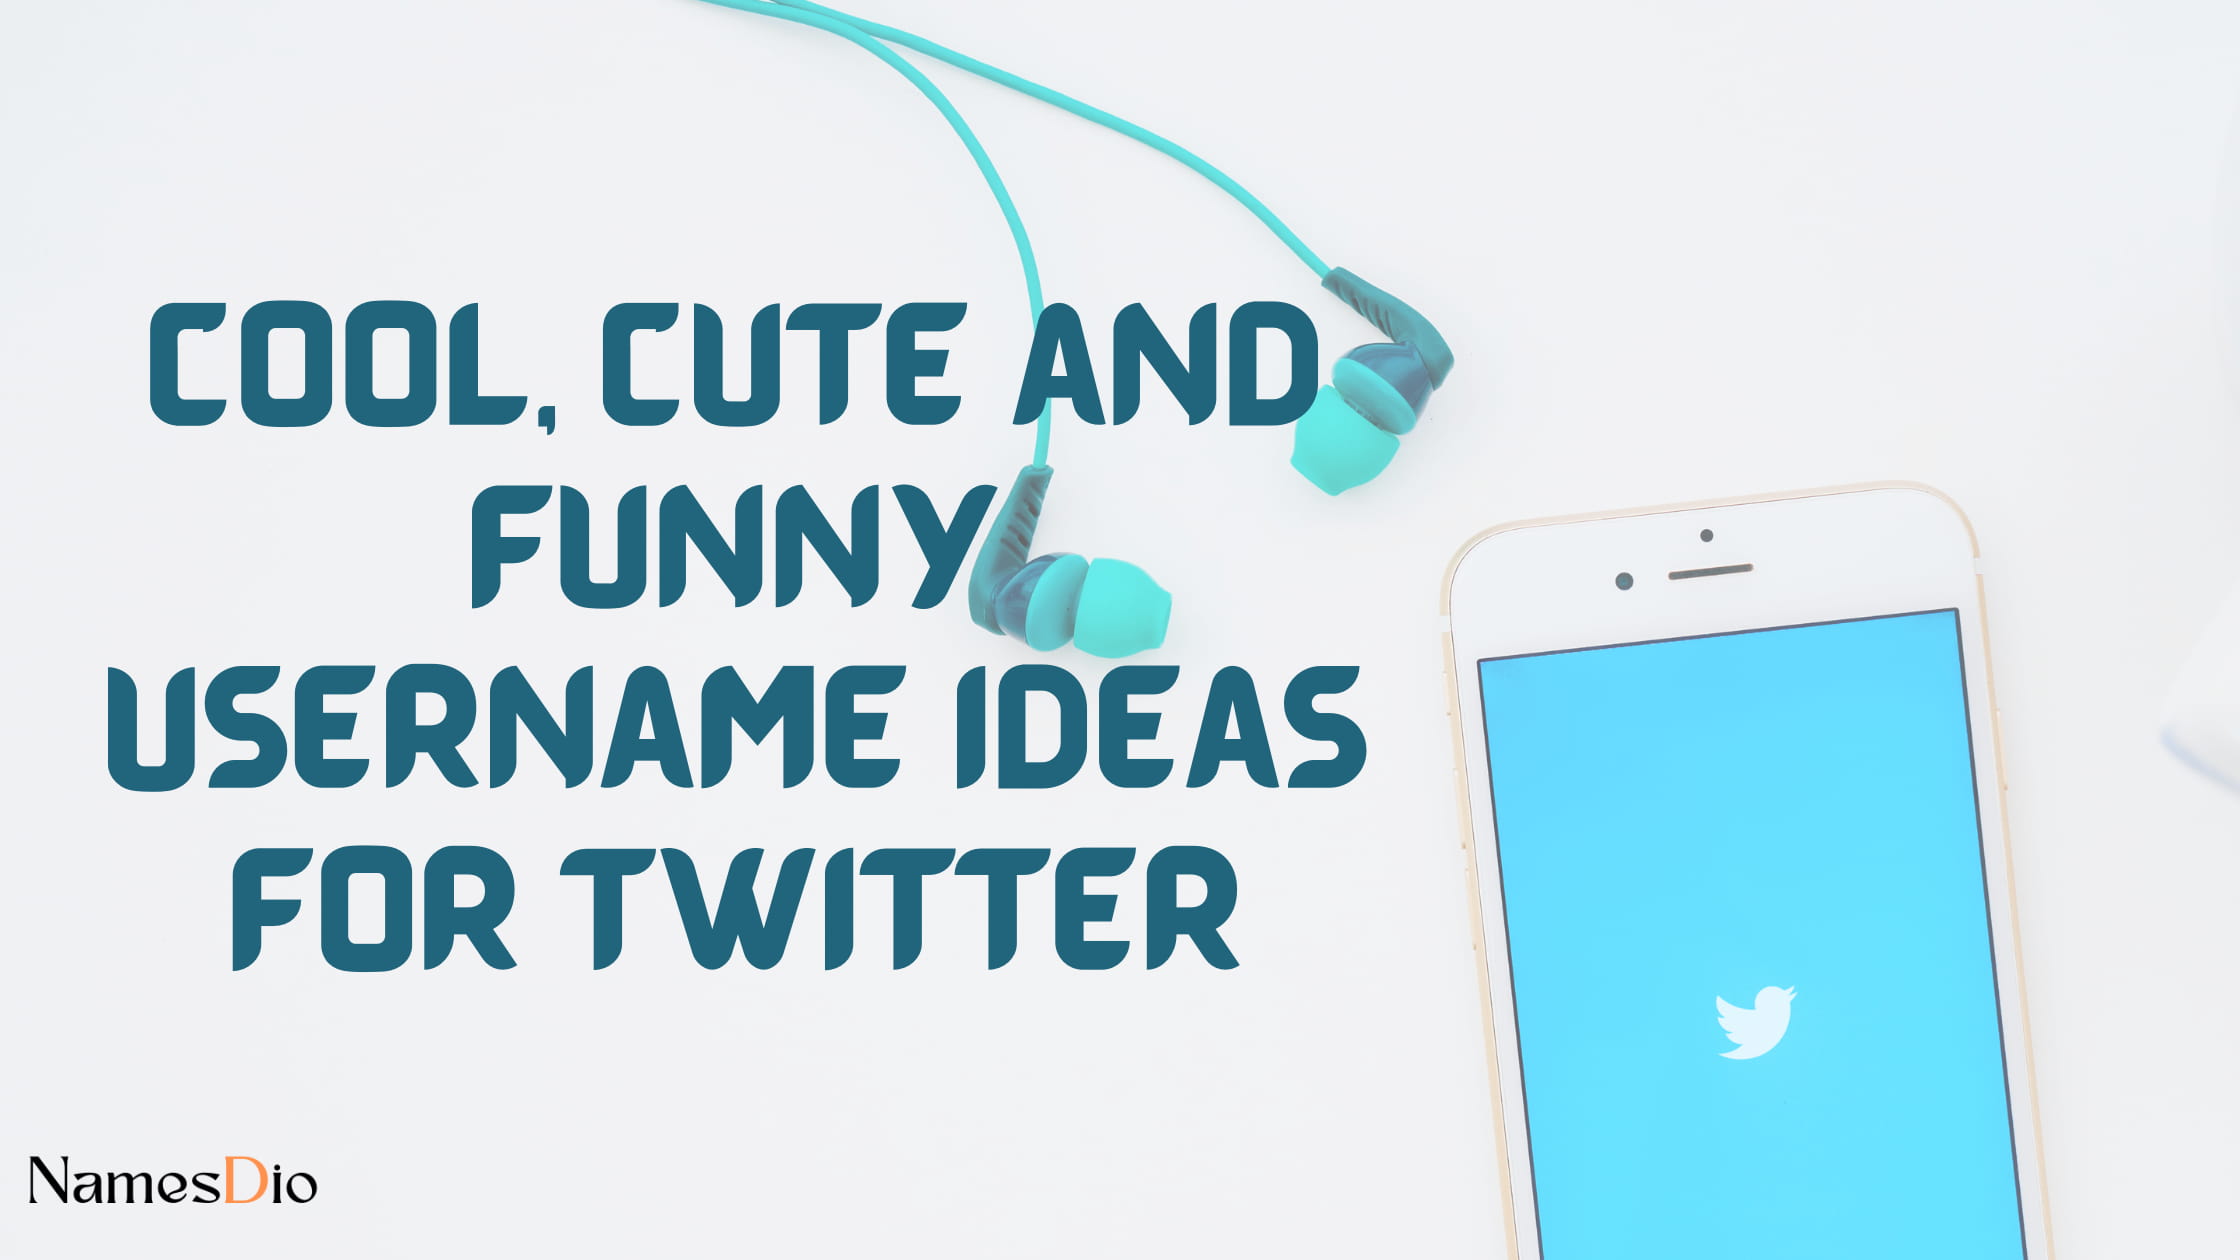 Cool-Cute-and-Funny-Username-Ideas-for-Twitter